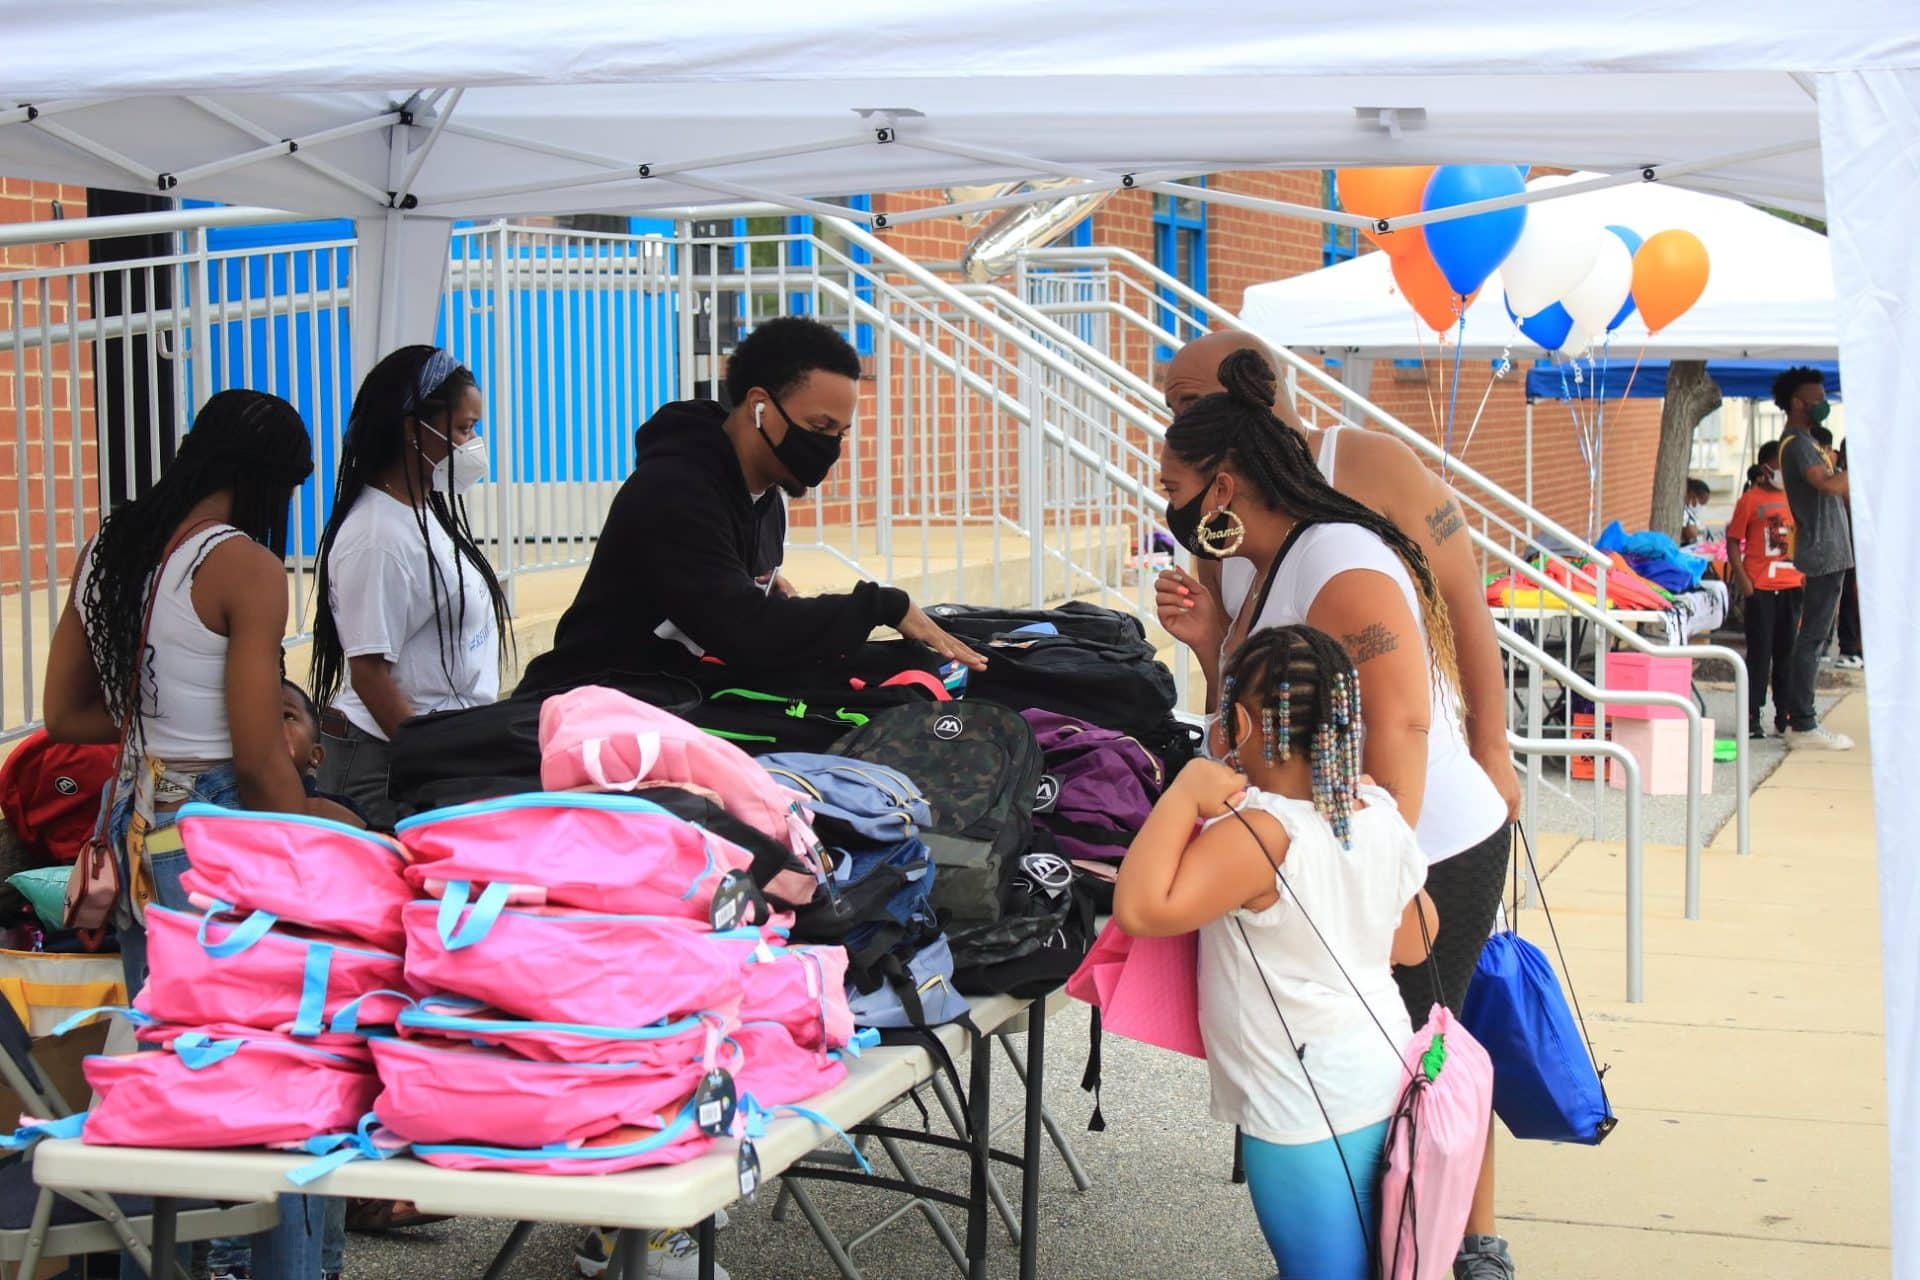 BPG & The Warehouse Provide School Supplies For 200 Students